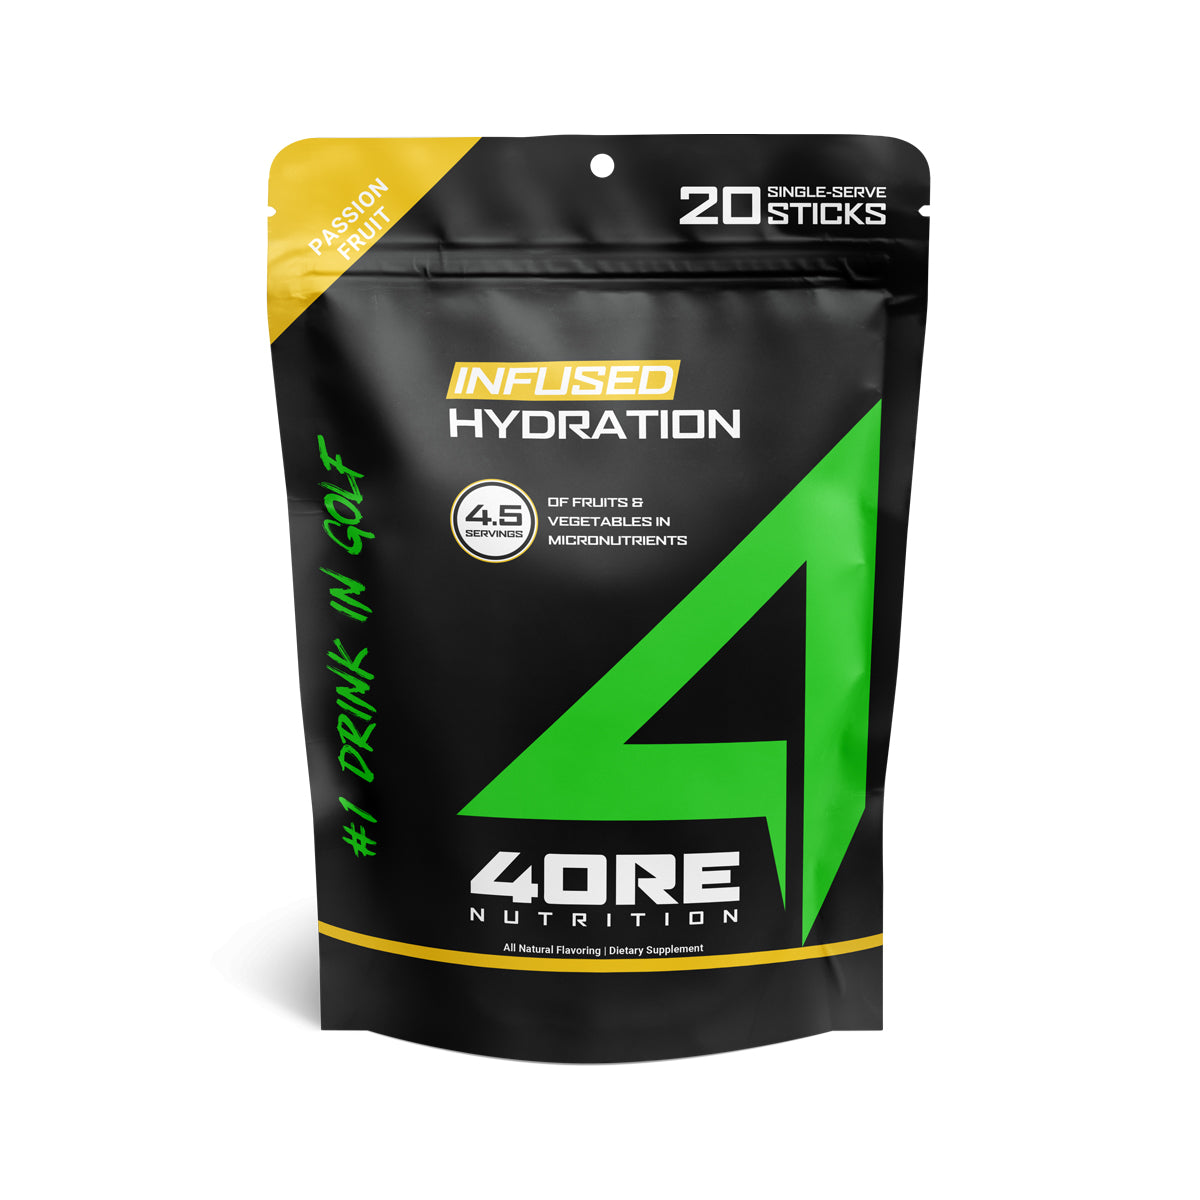 4ORE INFUSED HYDRATION - 4ORE NUTRITION 4ORE INFUSED HYDRATION Passion Fruit Infused Hydration